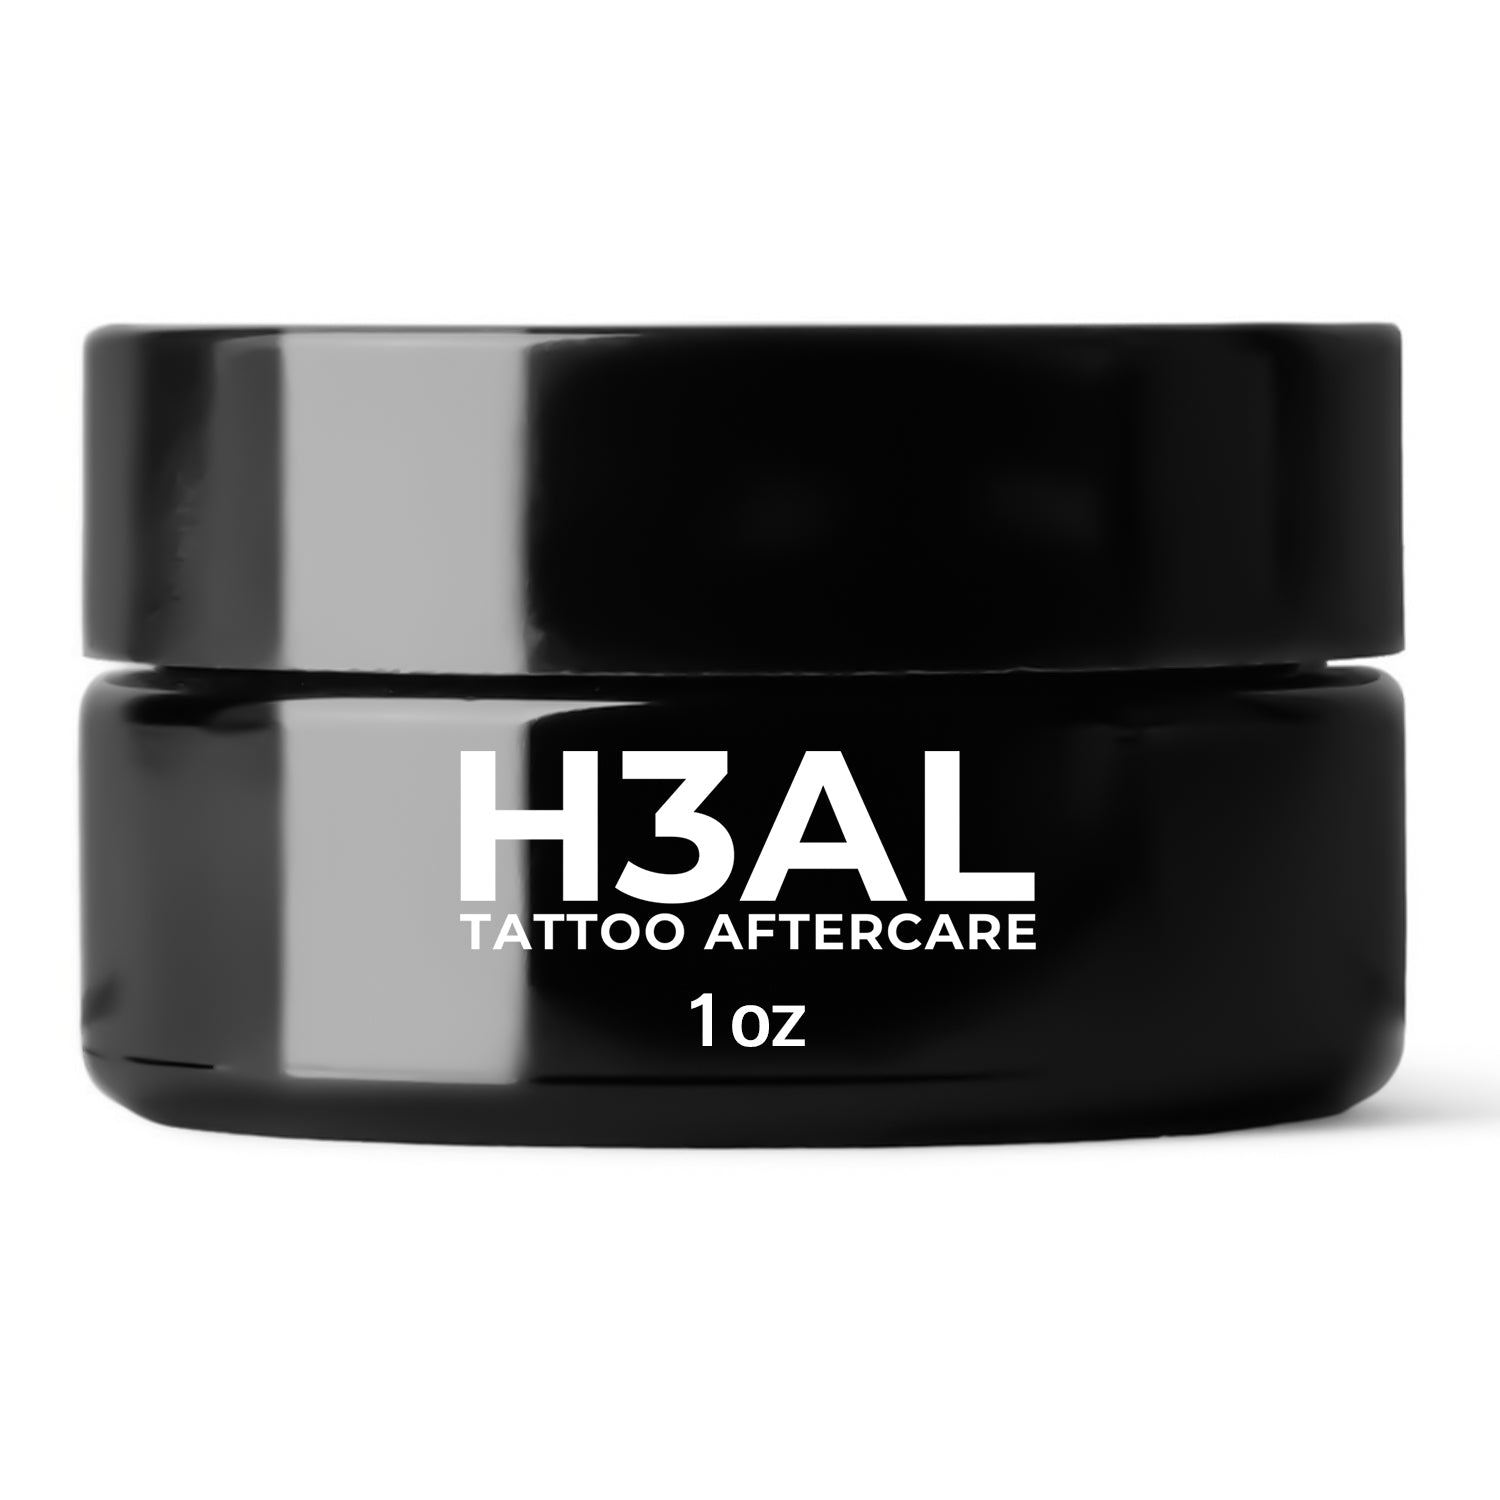 H3al Tattoo Aftercare